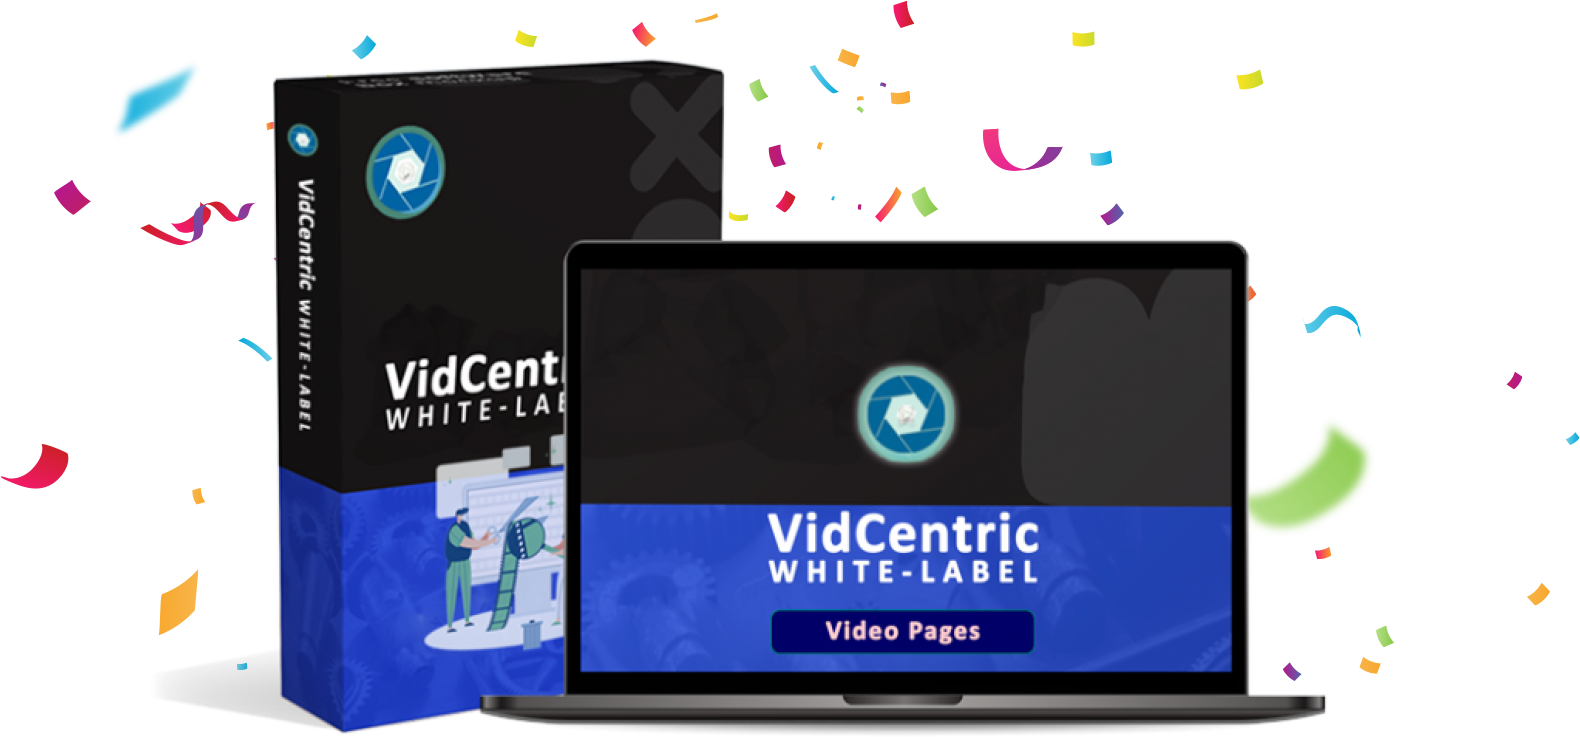 VidCentric White-Label Review  -Get 5 hot selling video softwares with Resell rights